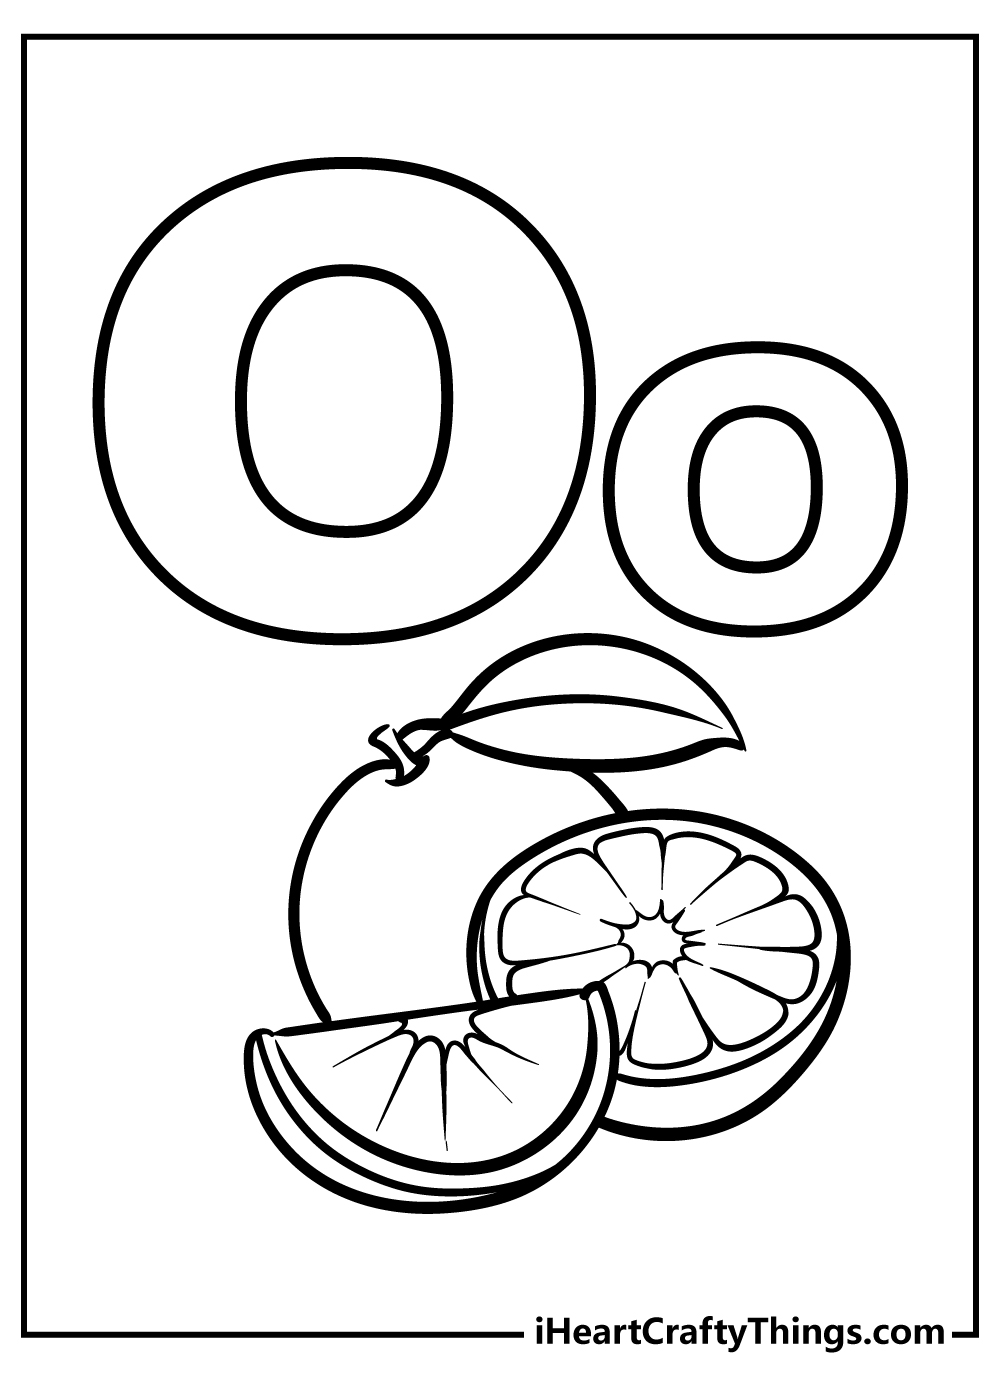 Letter O Coloring Pages free pdf download